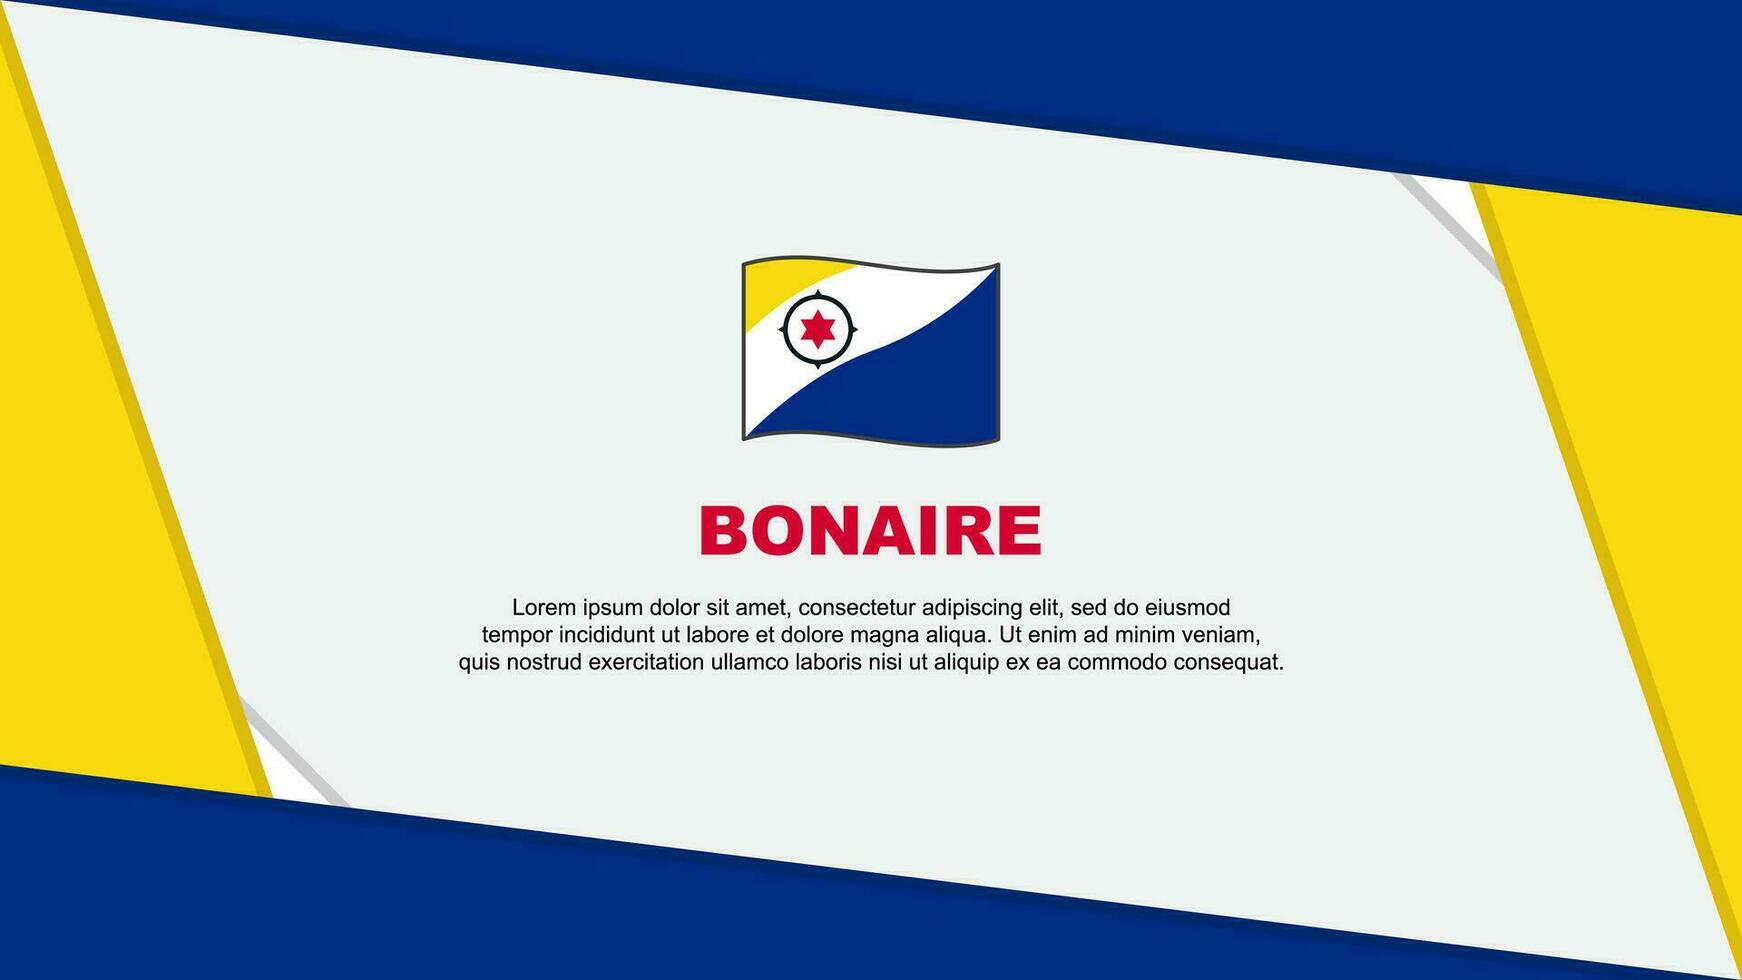 Bonaire Flag Abstract Background Design Template. Bonaire Independence Day Banner Cartoon Vector Illustration. Bonaire Independence Day